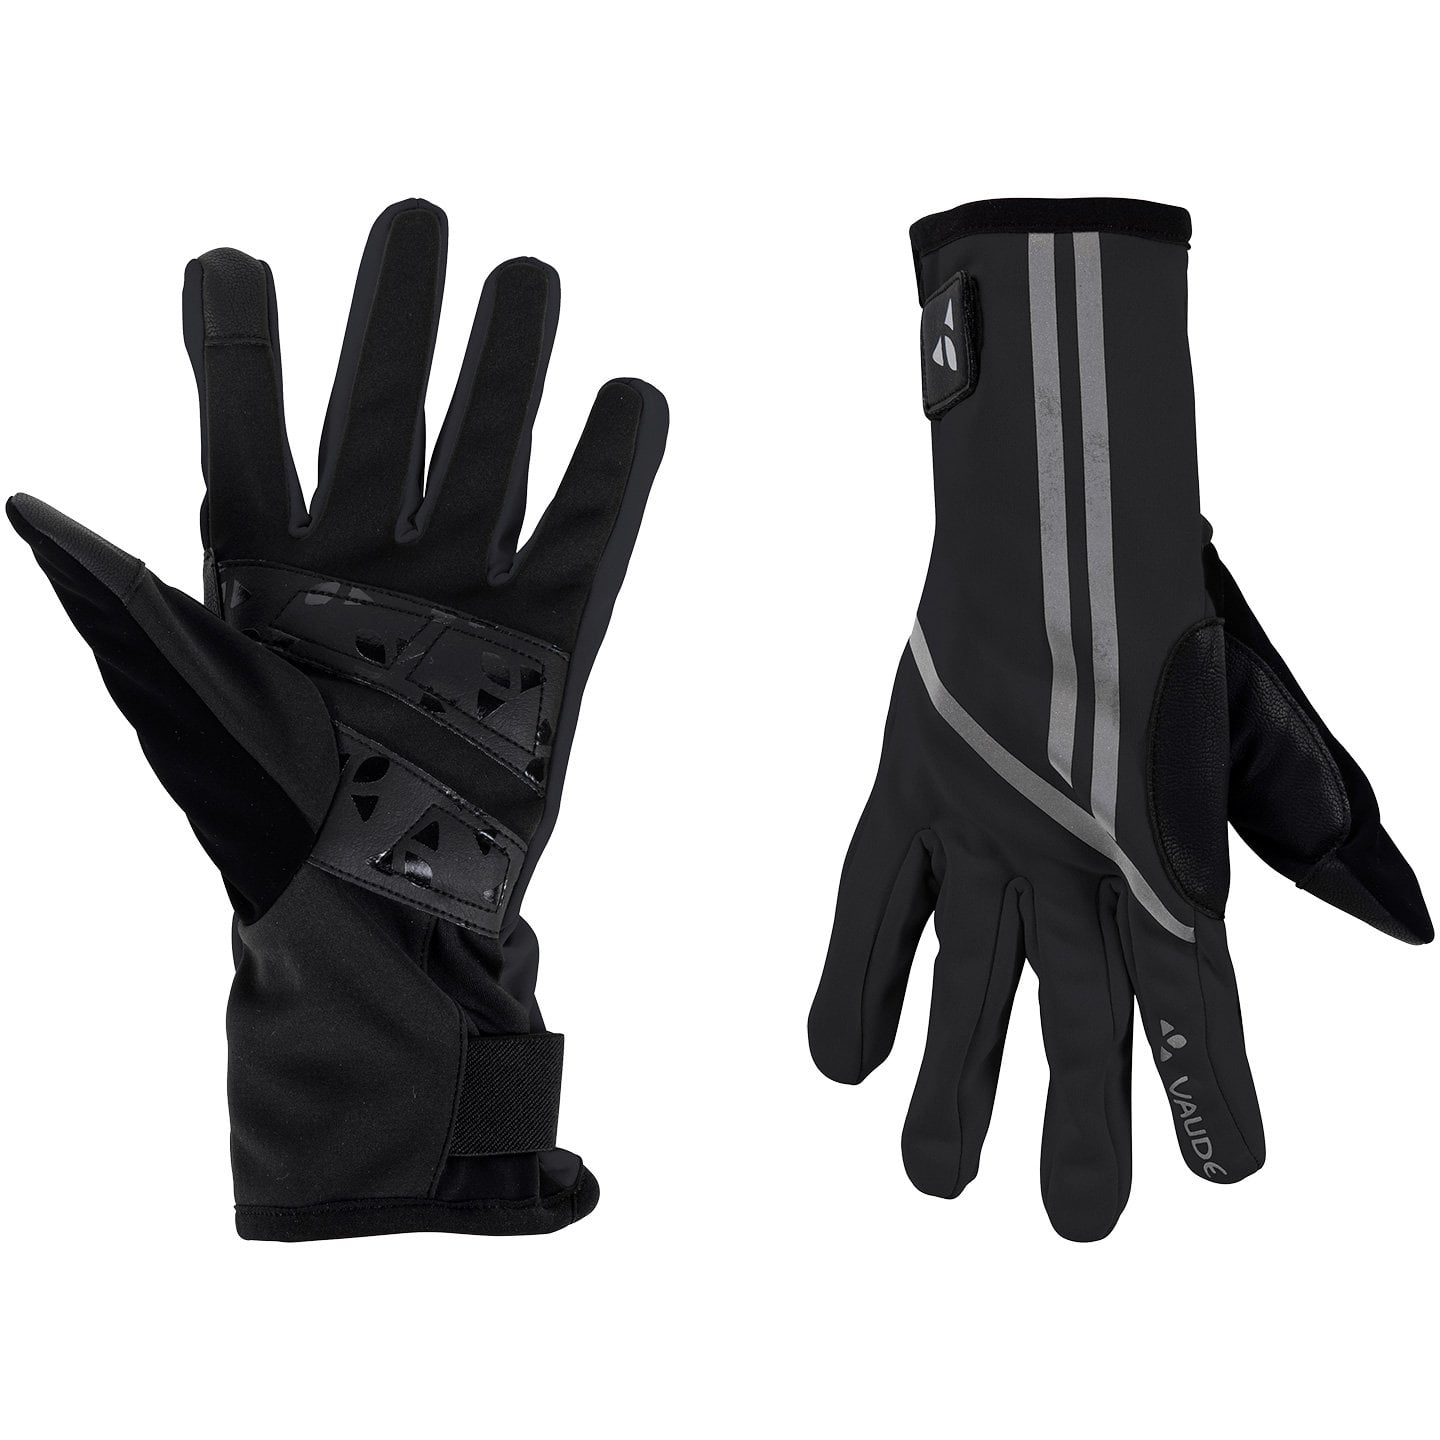 VAUDE Posta Warm Winter Gloves Winter Cycling Gloves, for men, size 11, Cycle gloves, MTB gear